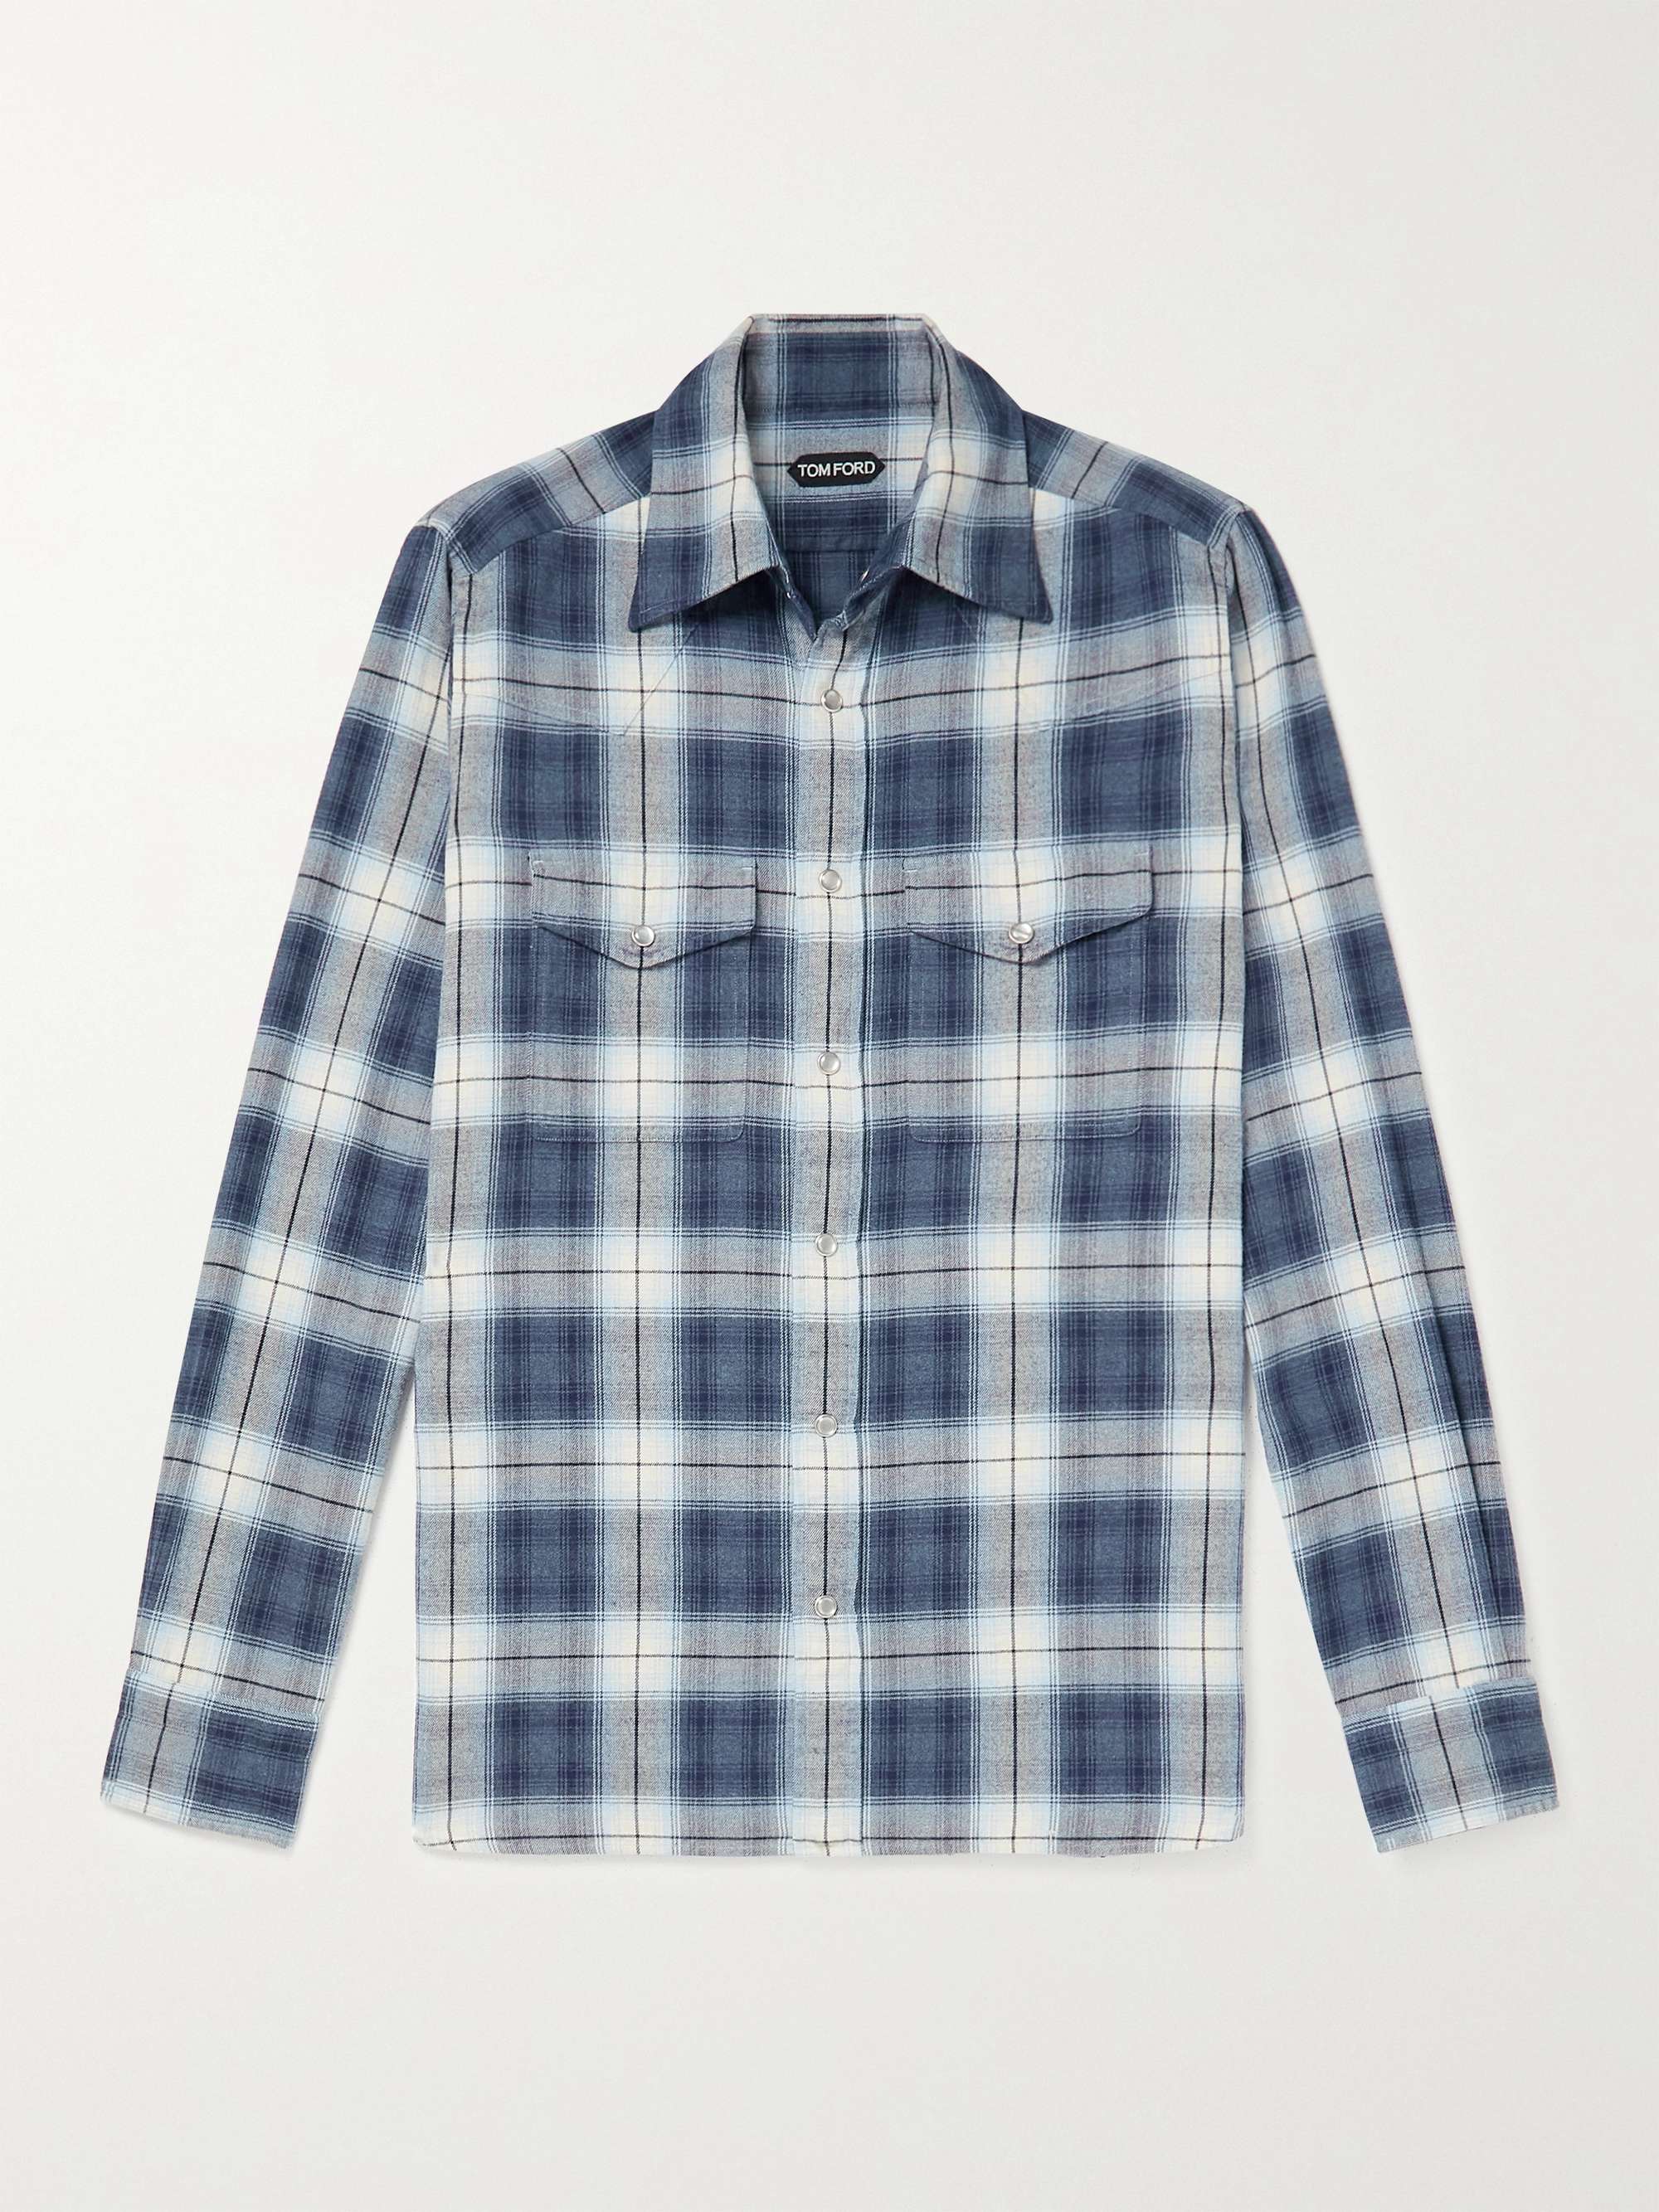 TOM FORD Slim-Fit Checked Cotton-Flannel Shirt